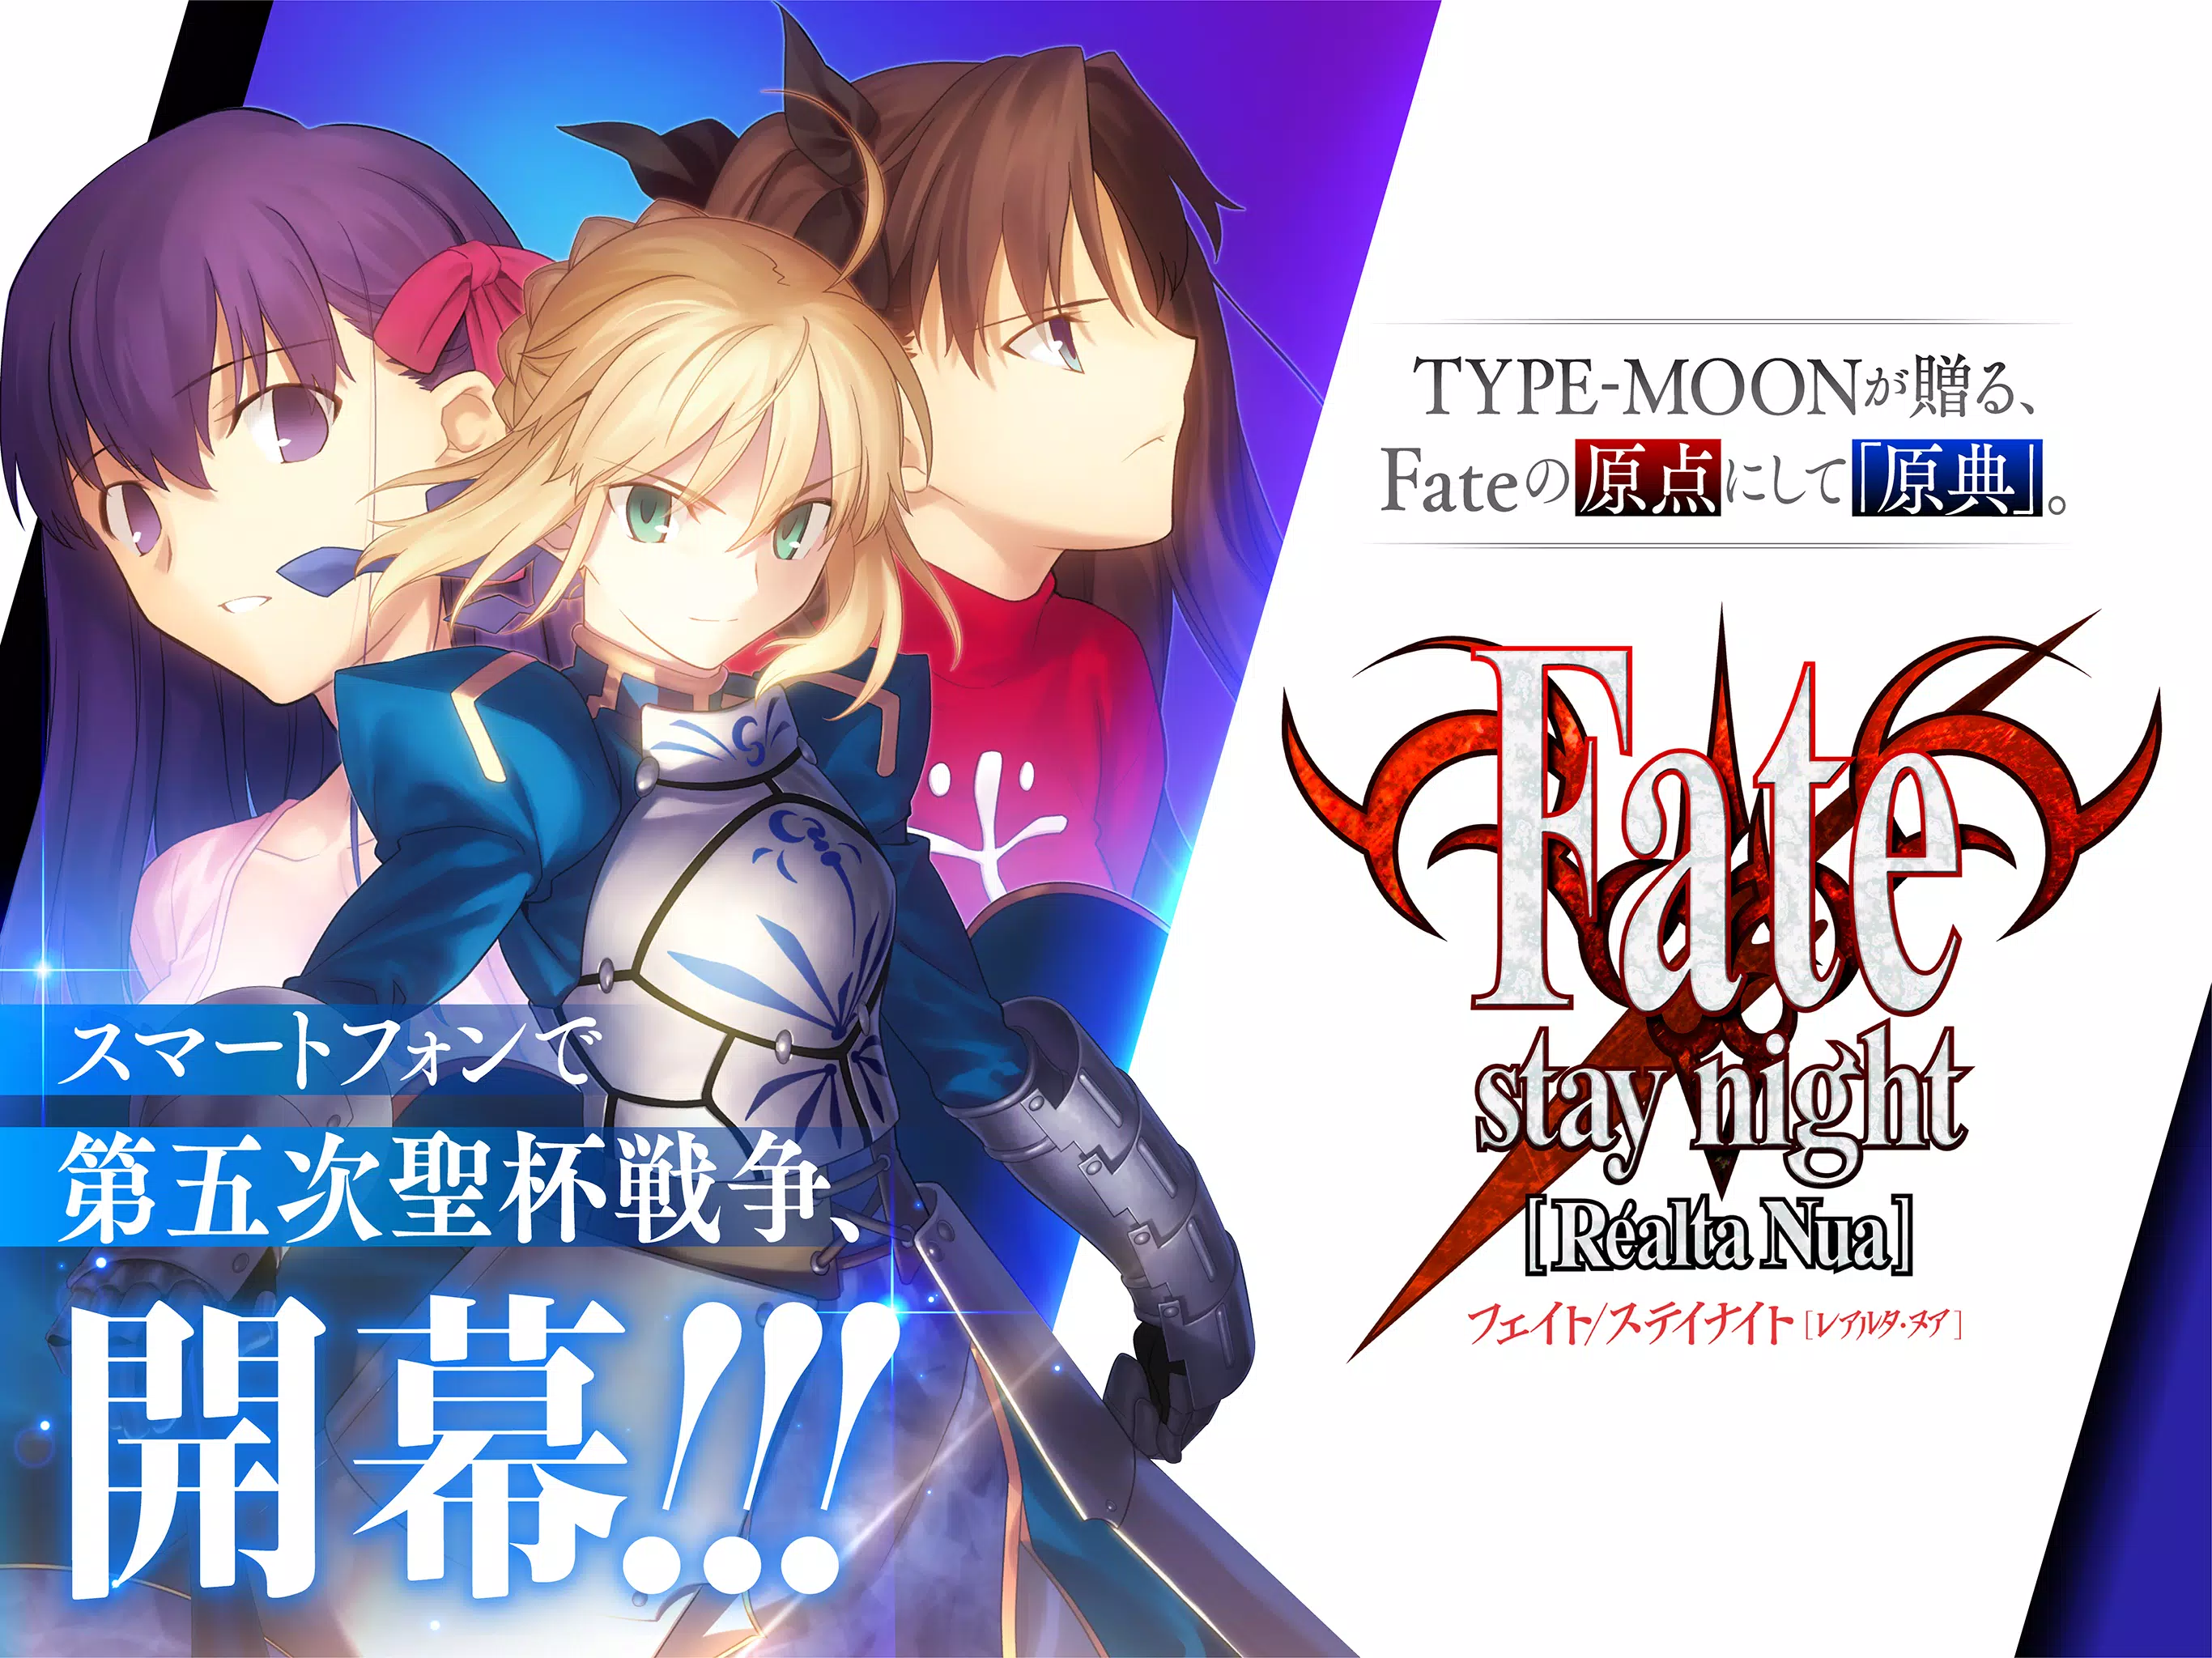 Fate/stay night [Realta Nua] for Android - APK Download